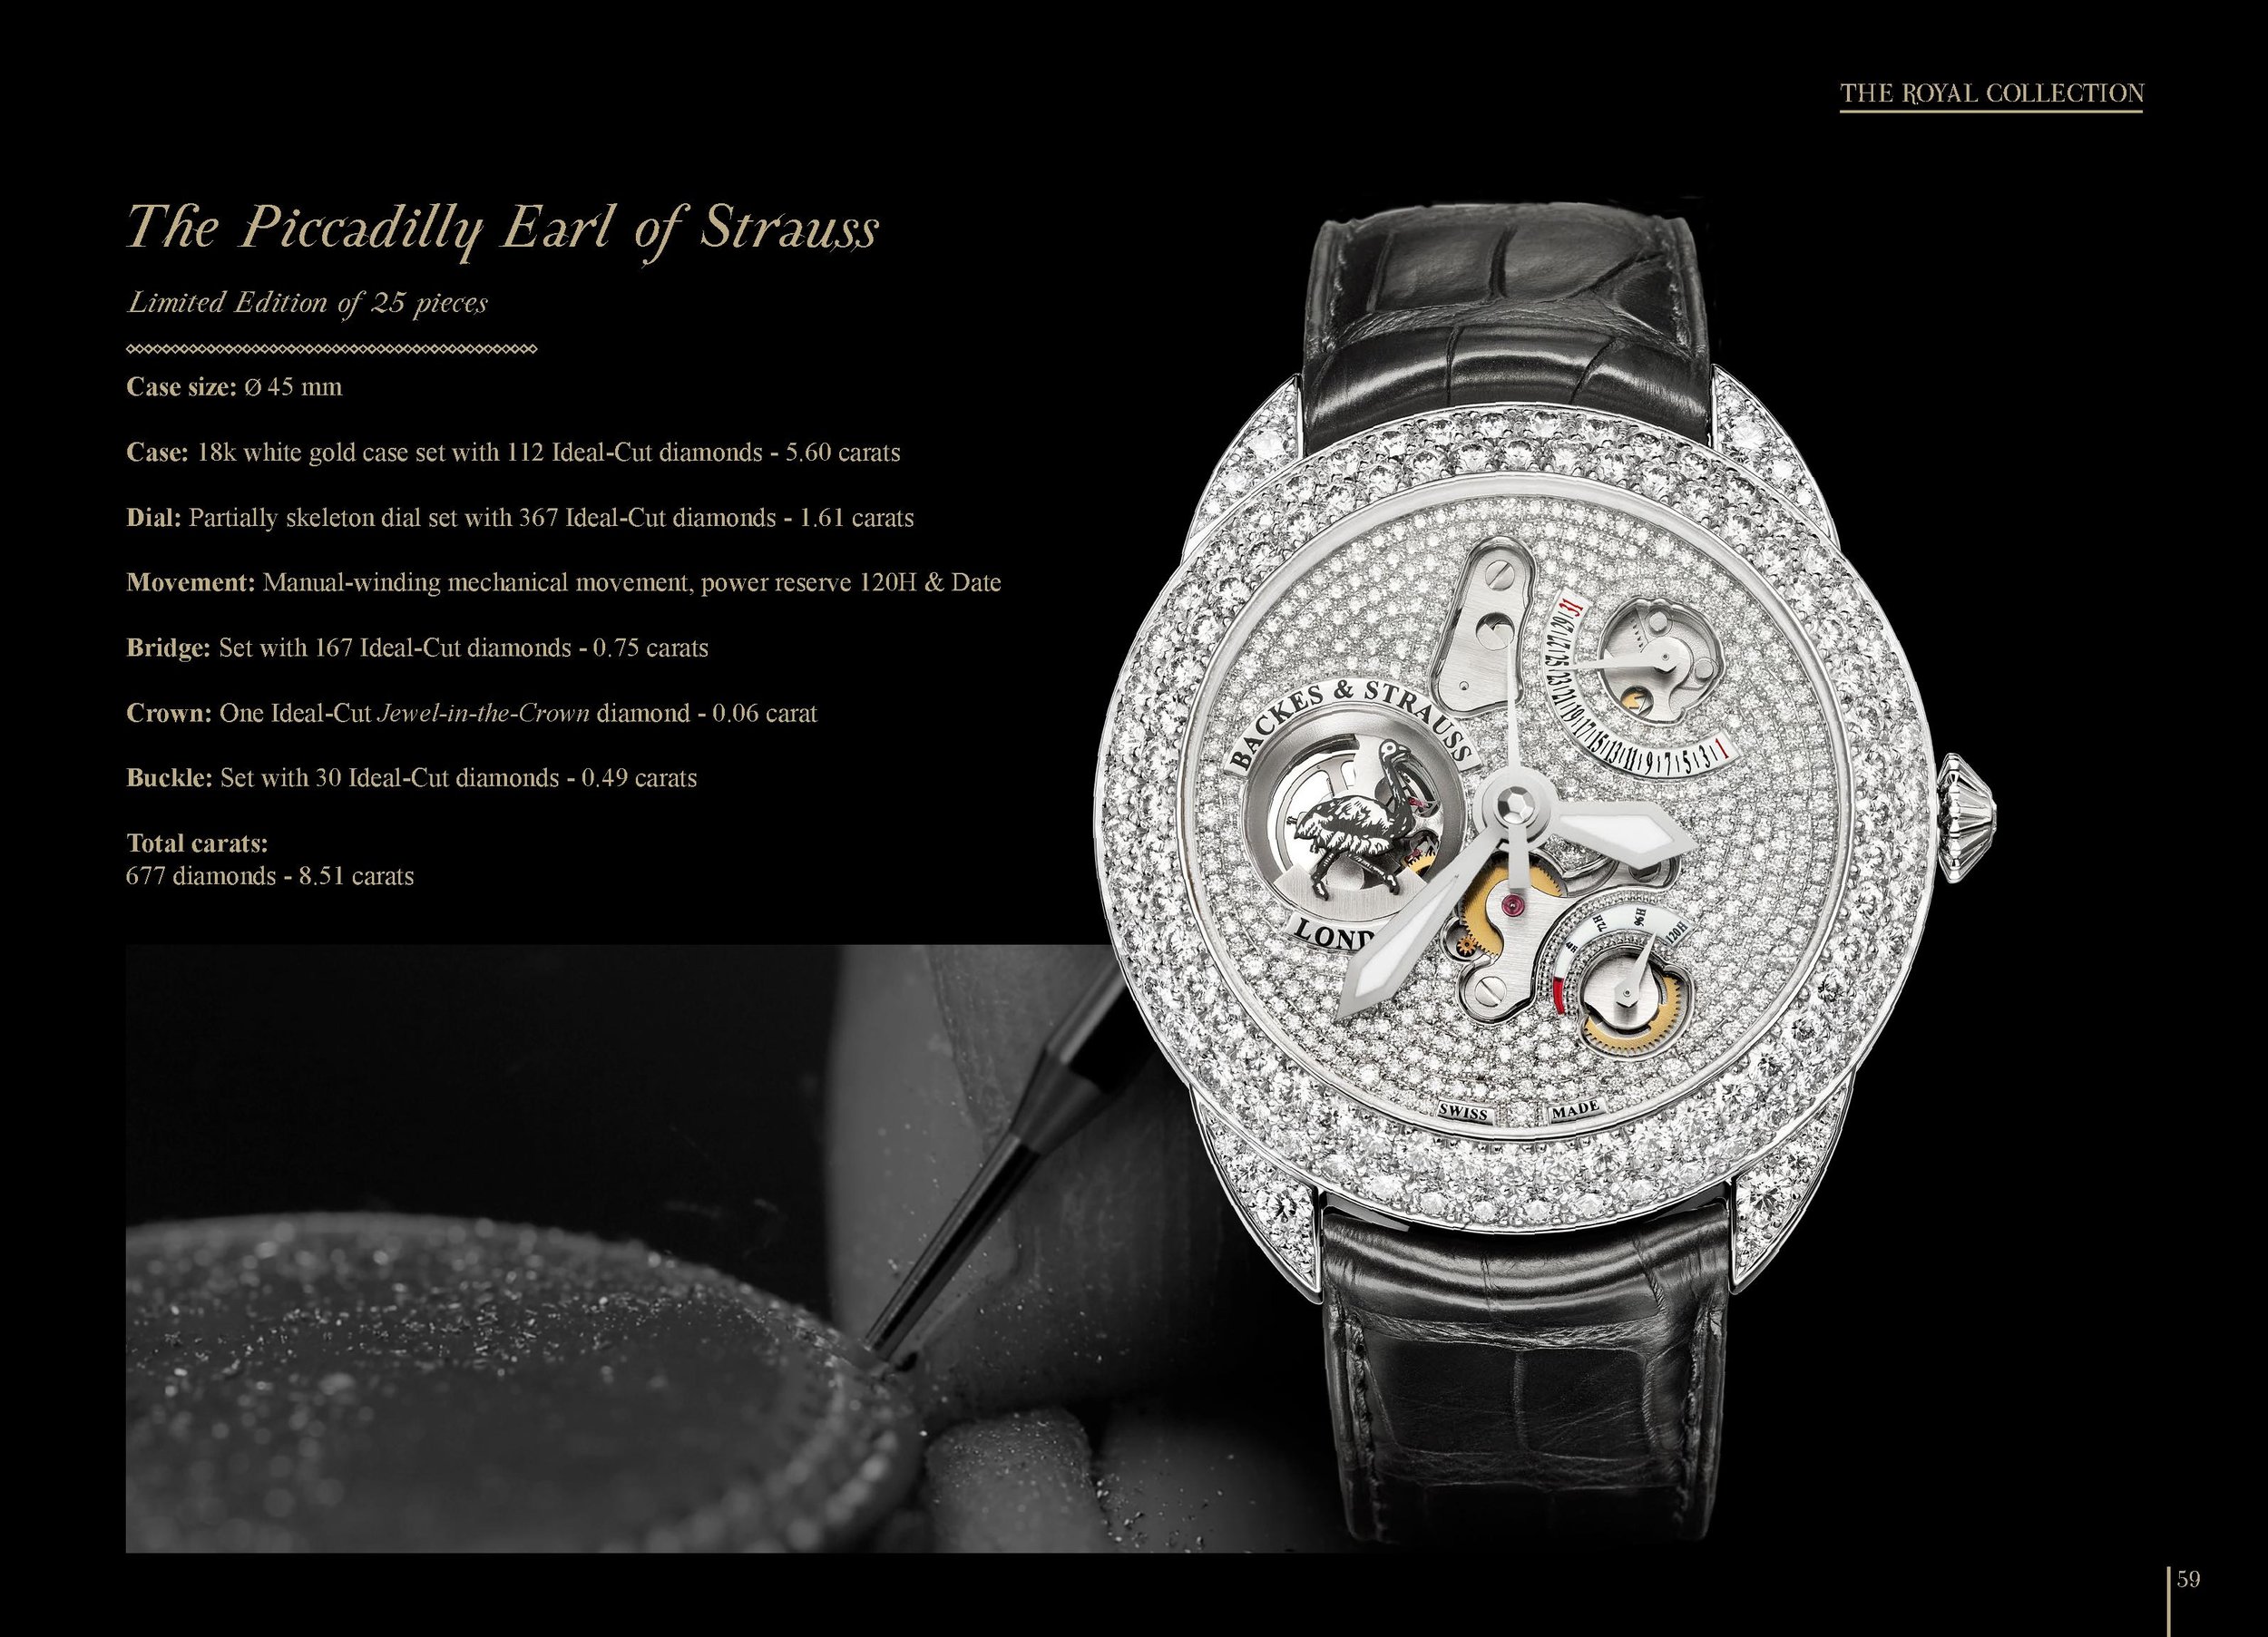 The Piccadilly Earl of Strauss limited edition watch 